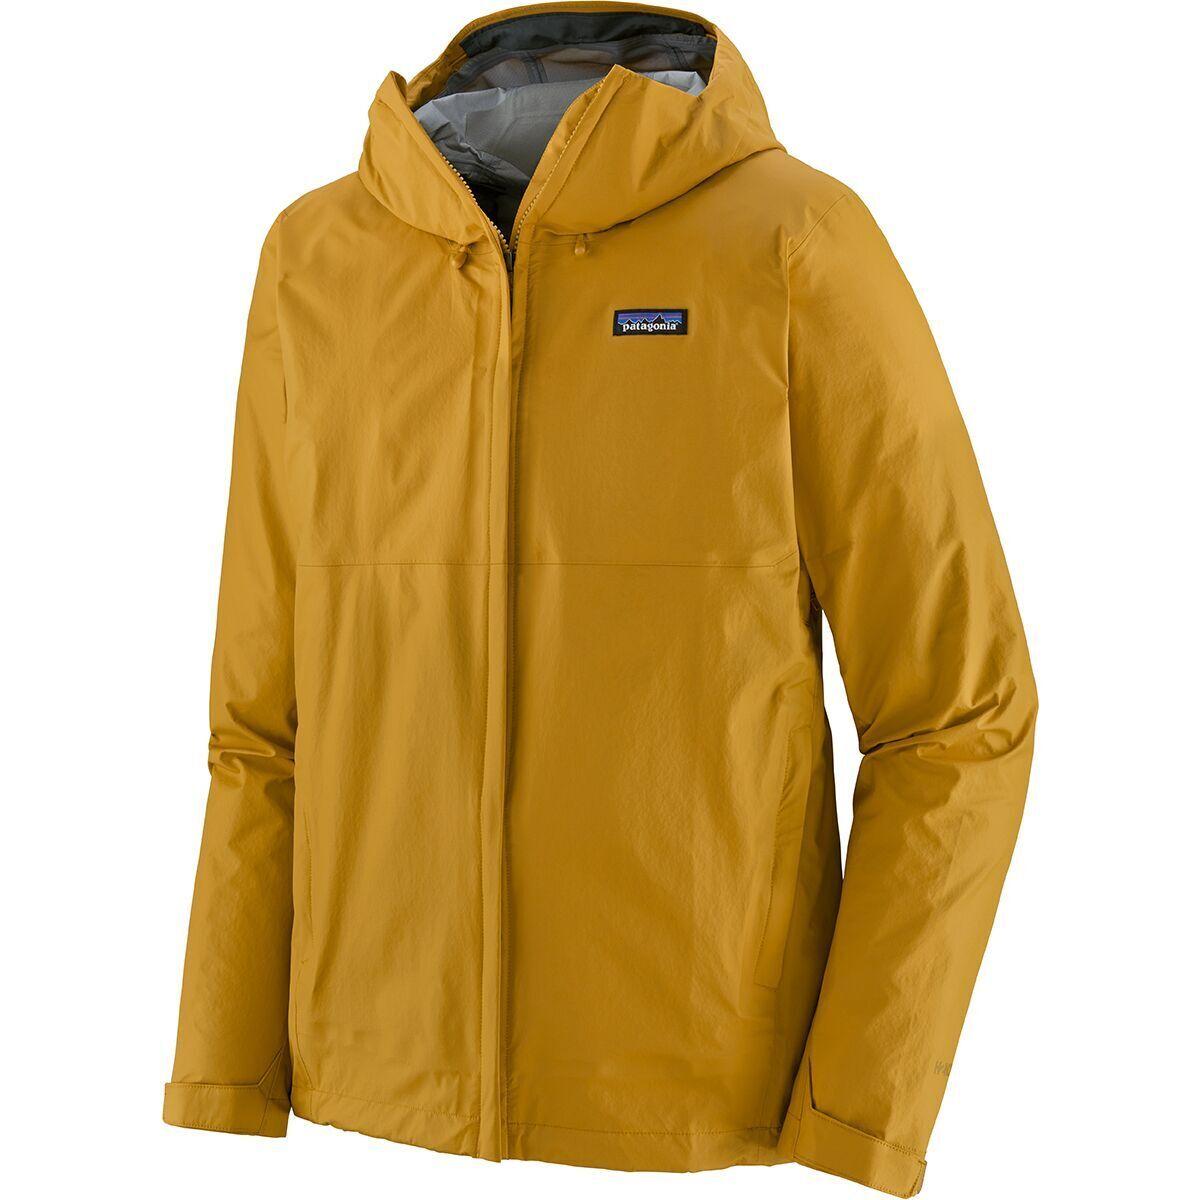 Patagonia Synthetic Torrentshell 3l Jacket in Yellow for Men - Lyst